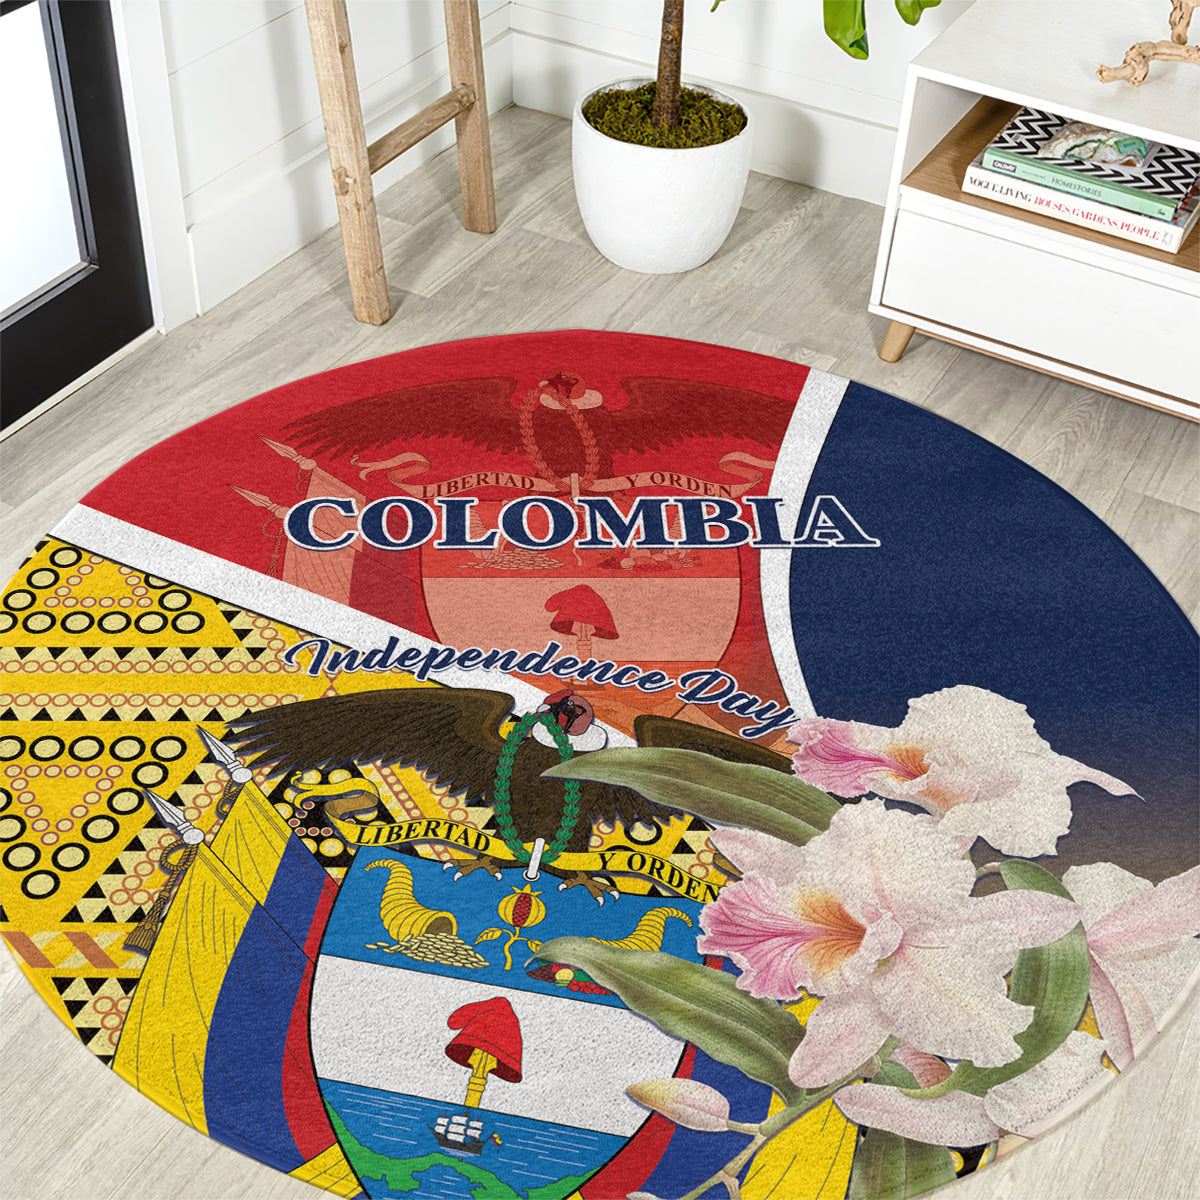 Colombia Independence Day Round Carpet Libertad y Orden Colombian Pattern